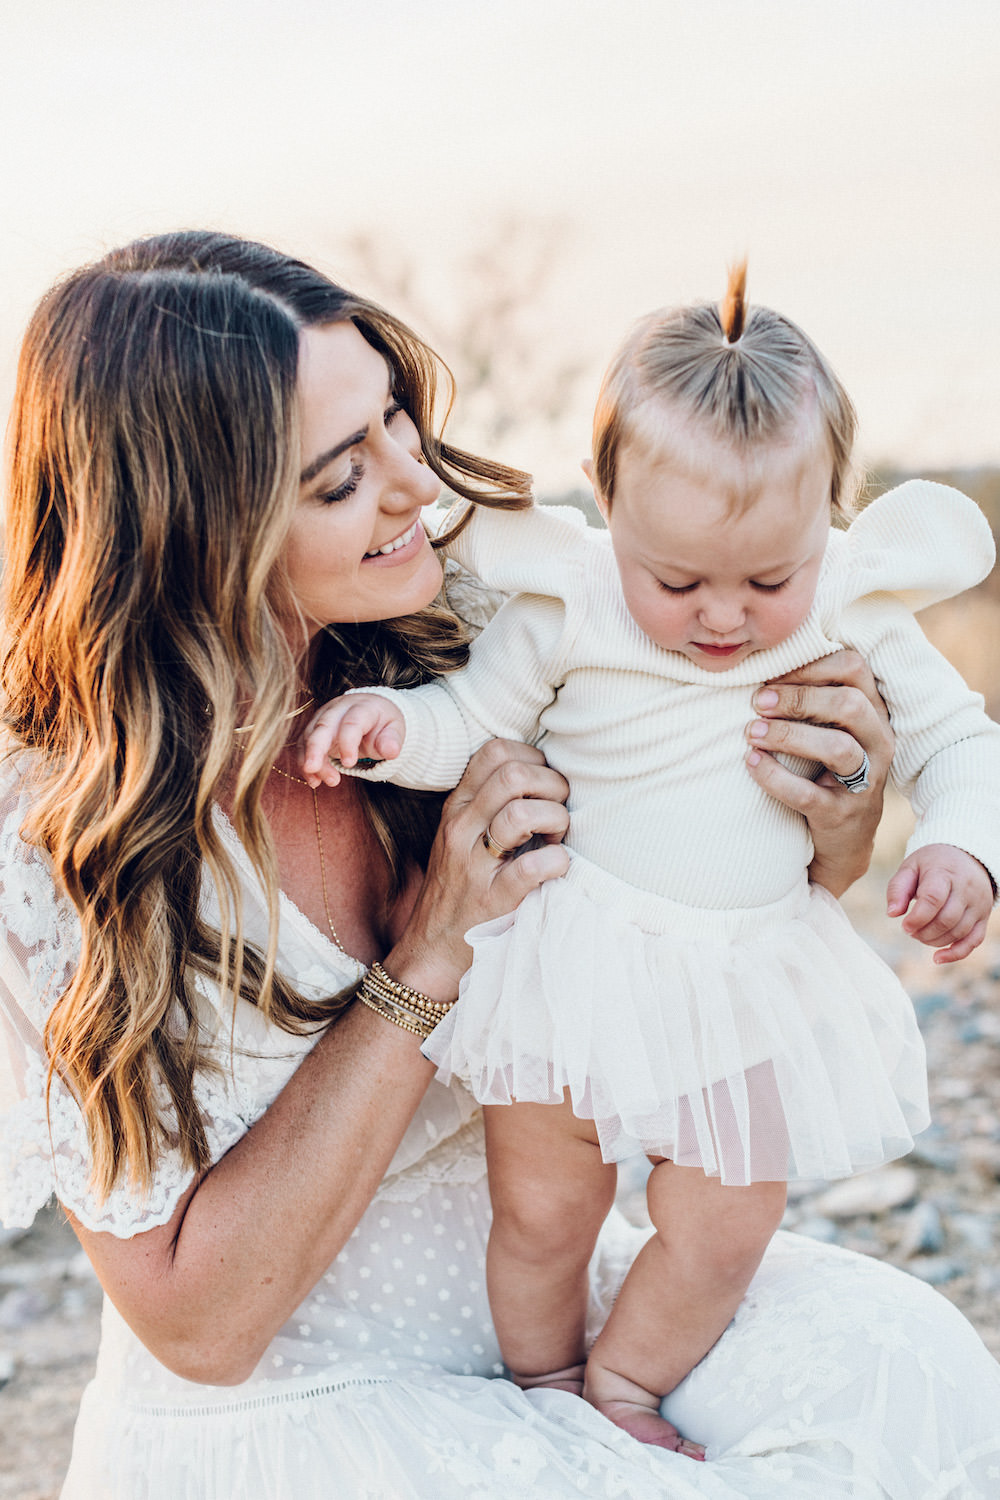 Dash of Darling | Family Photos for the Holidays